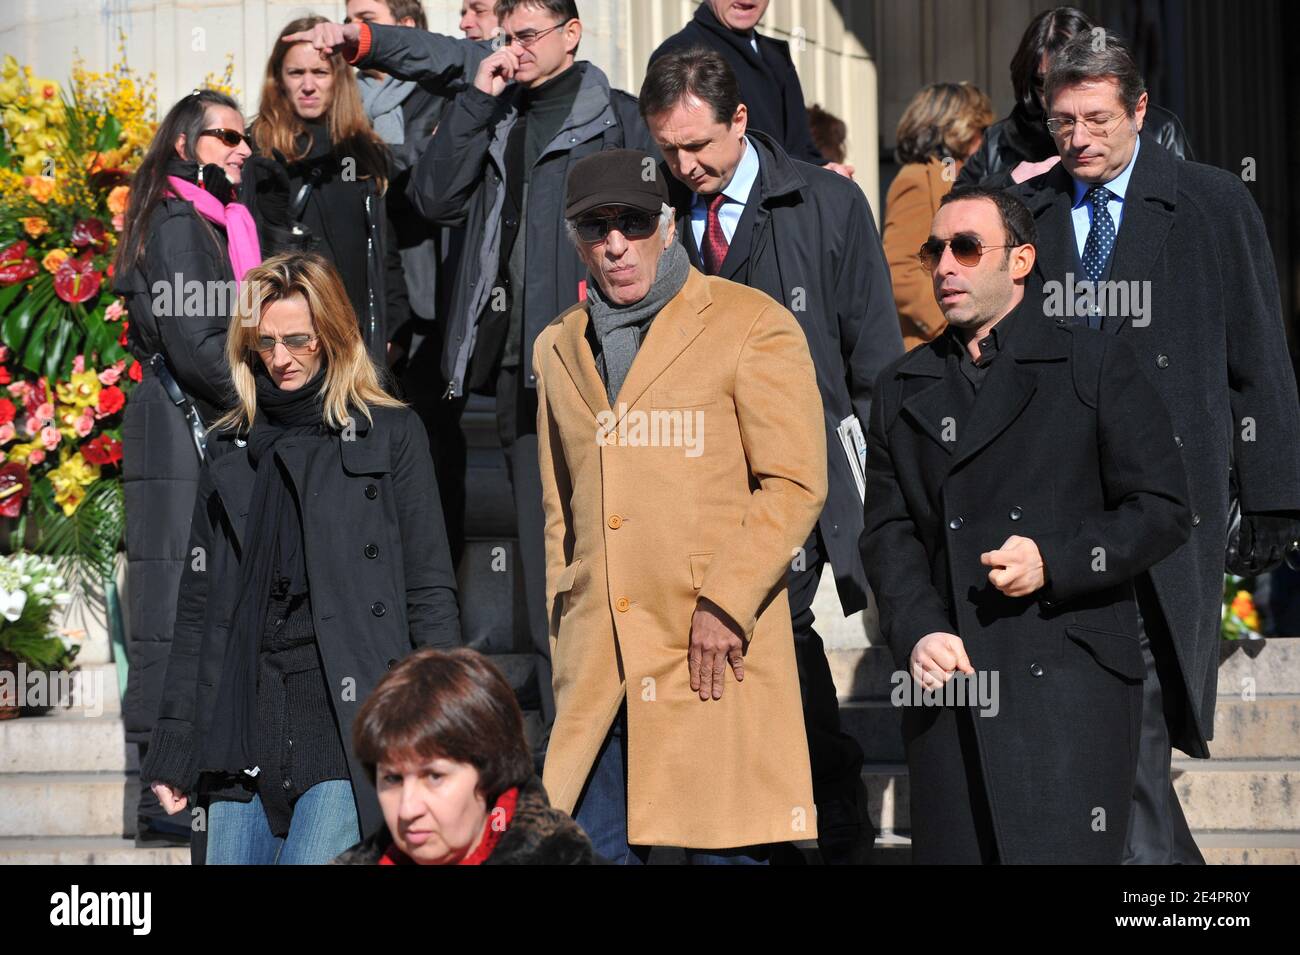 Gerard Darmon leaving the funeral mass of French singer Henri Salvador at the Madeleine church in Paris, France on February 16, 2008. Salvador died at the age of 90 of an aneurysm at his Paris home on February 13. Photo by ABACAPRESS.COM Stock Photo